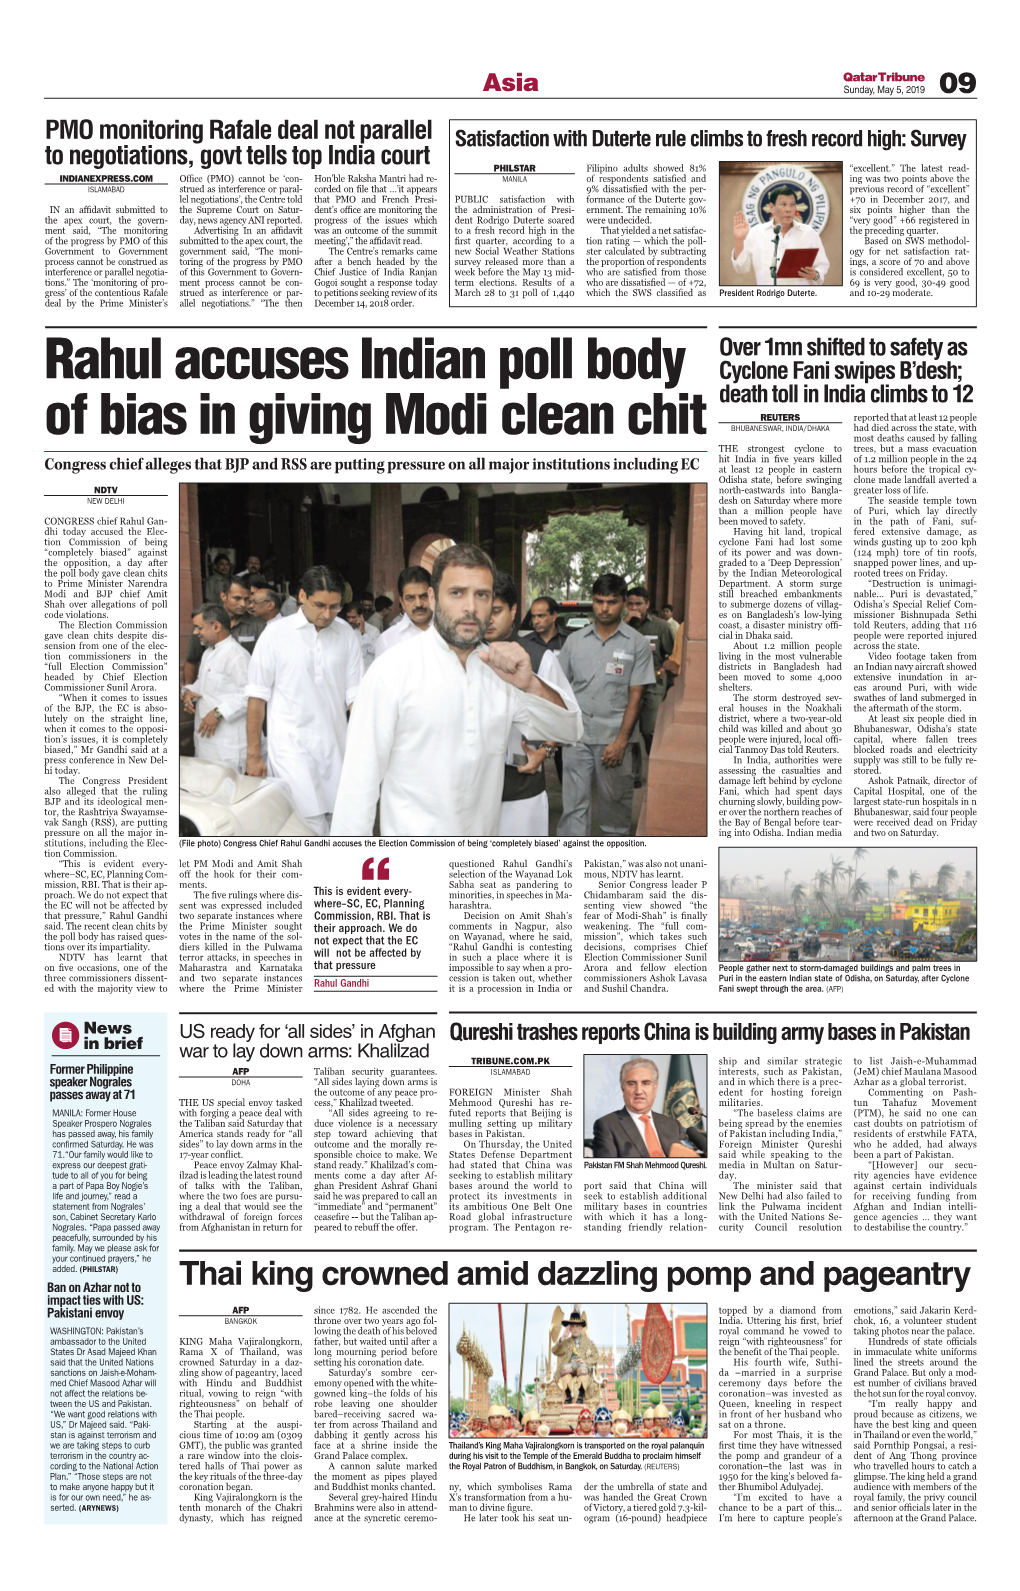 Rahul Accuses Indian Poll Body of Bias in Giving Modi Clean Chit